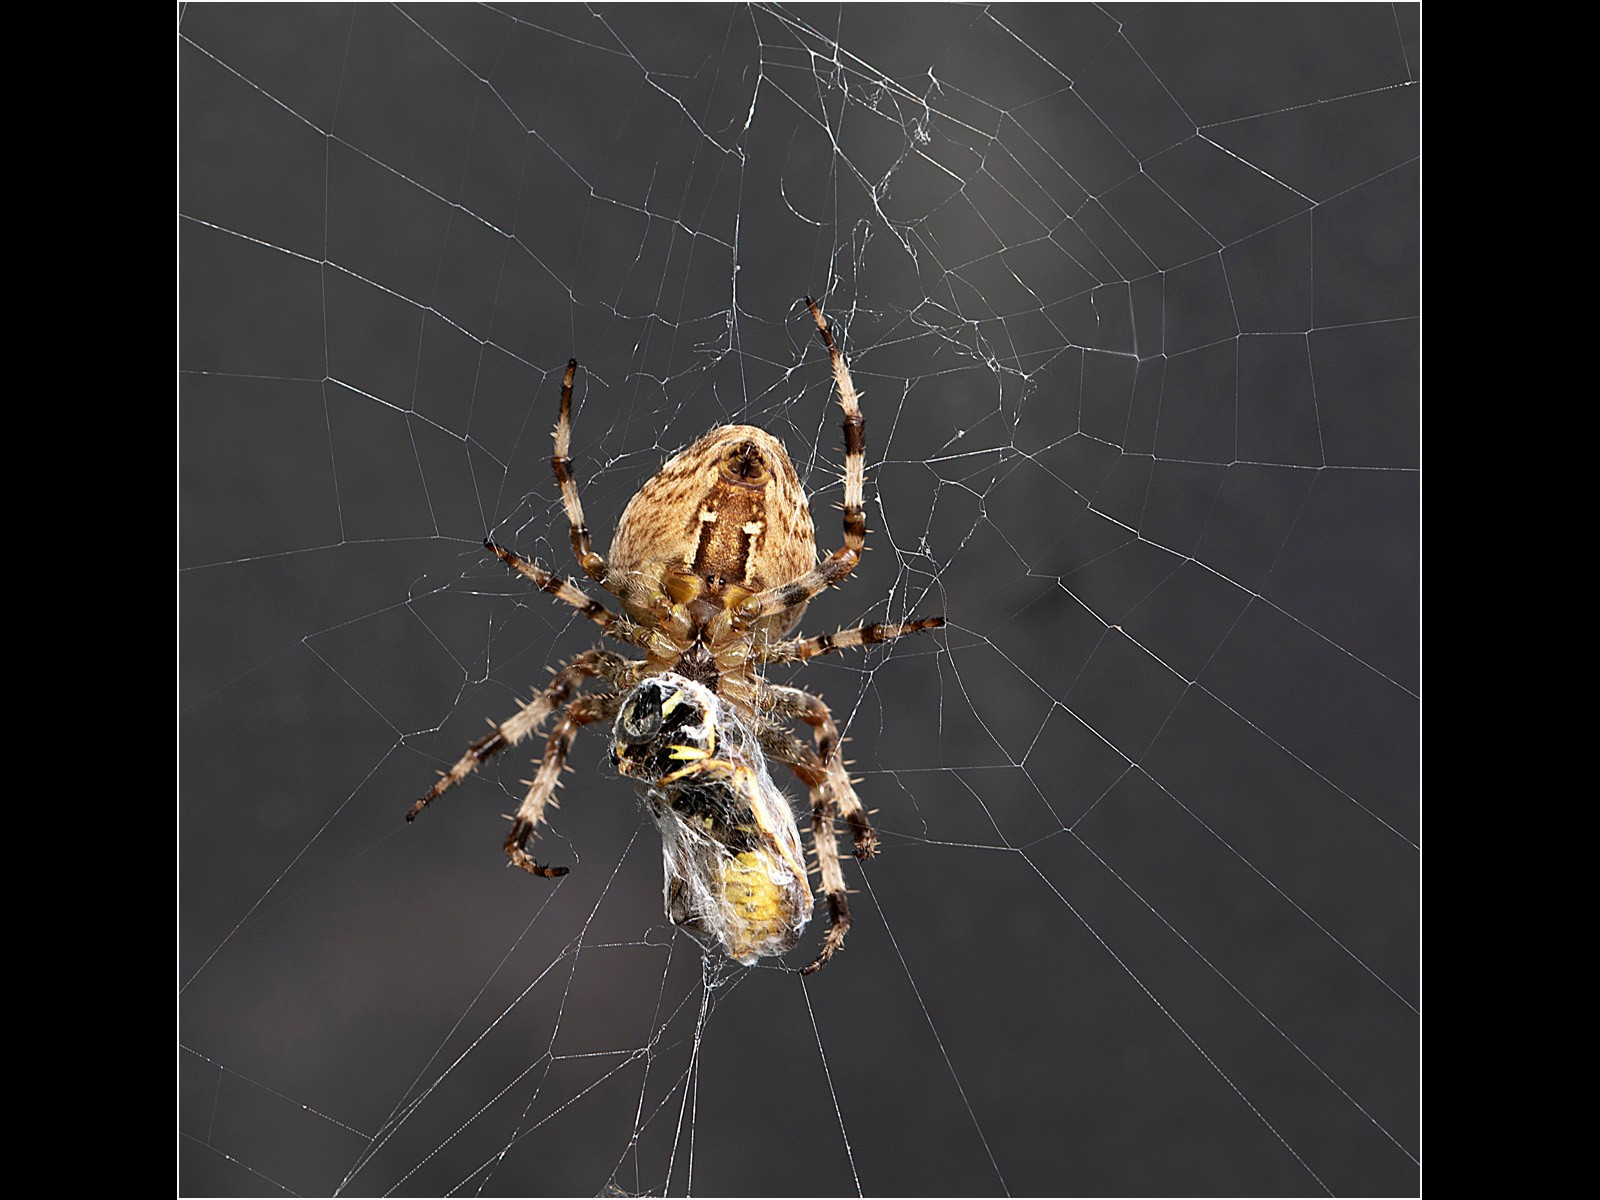 Orb Weaver Spider with Wasp Prey